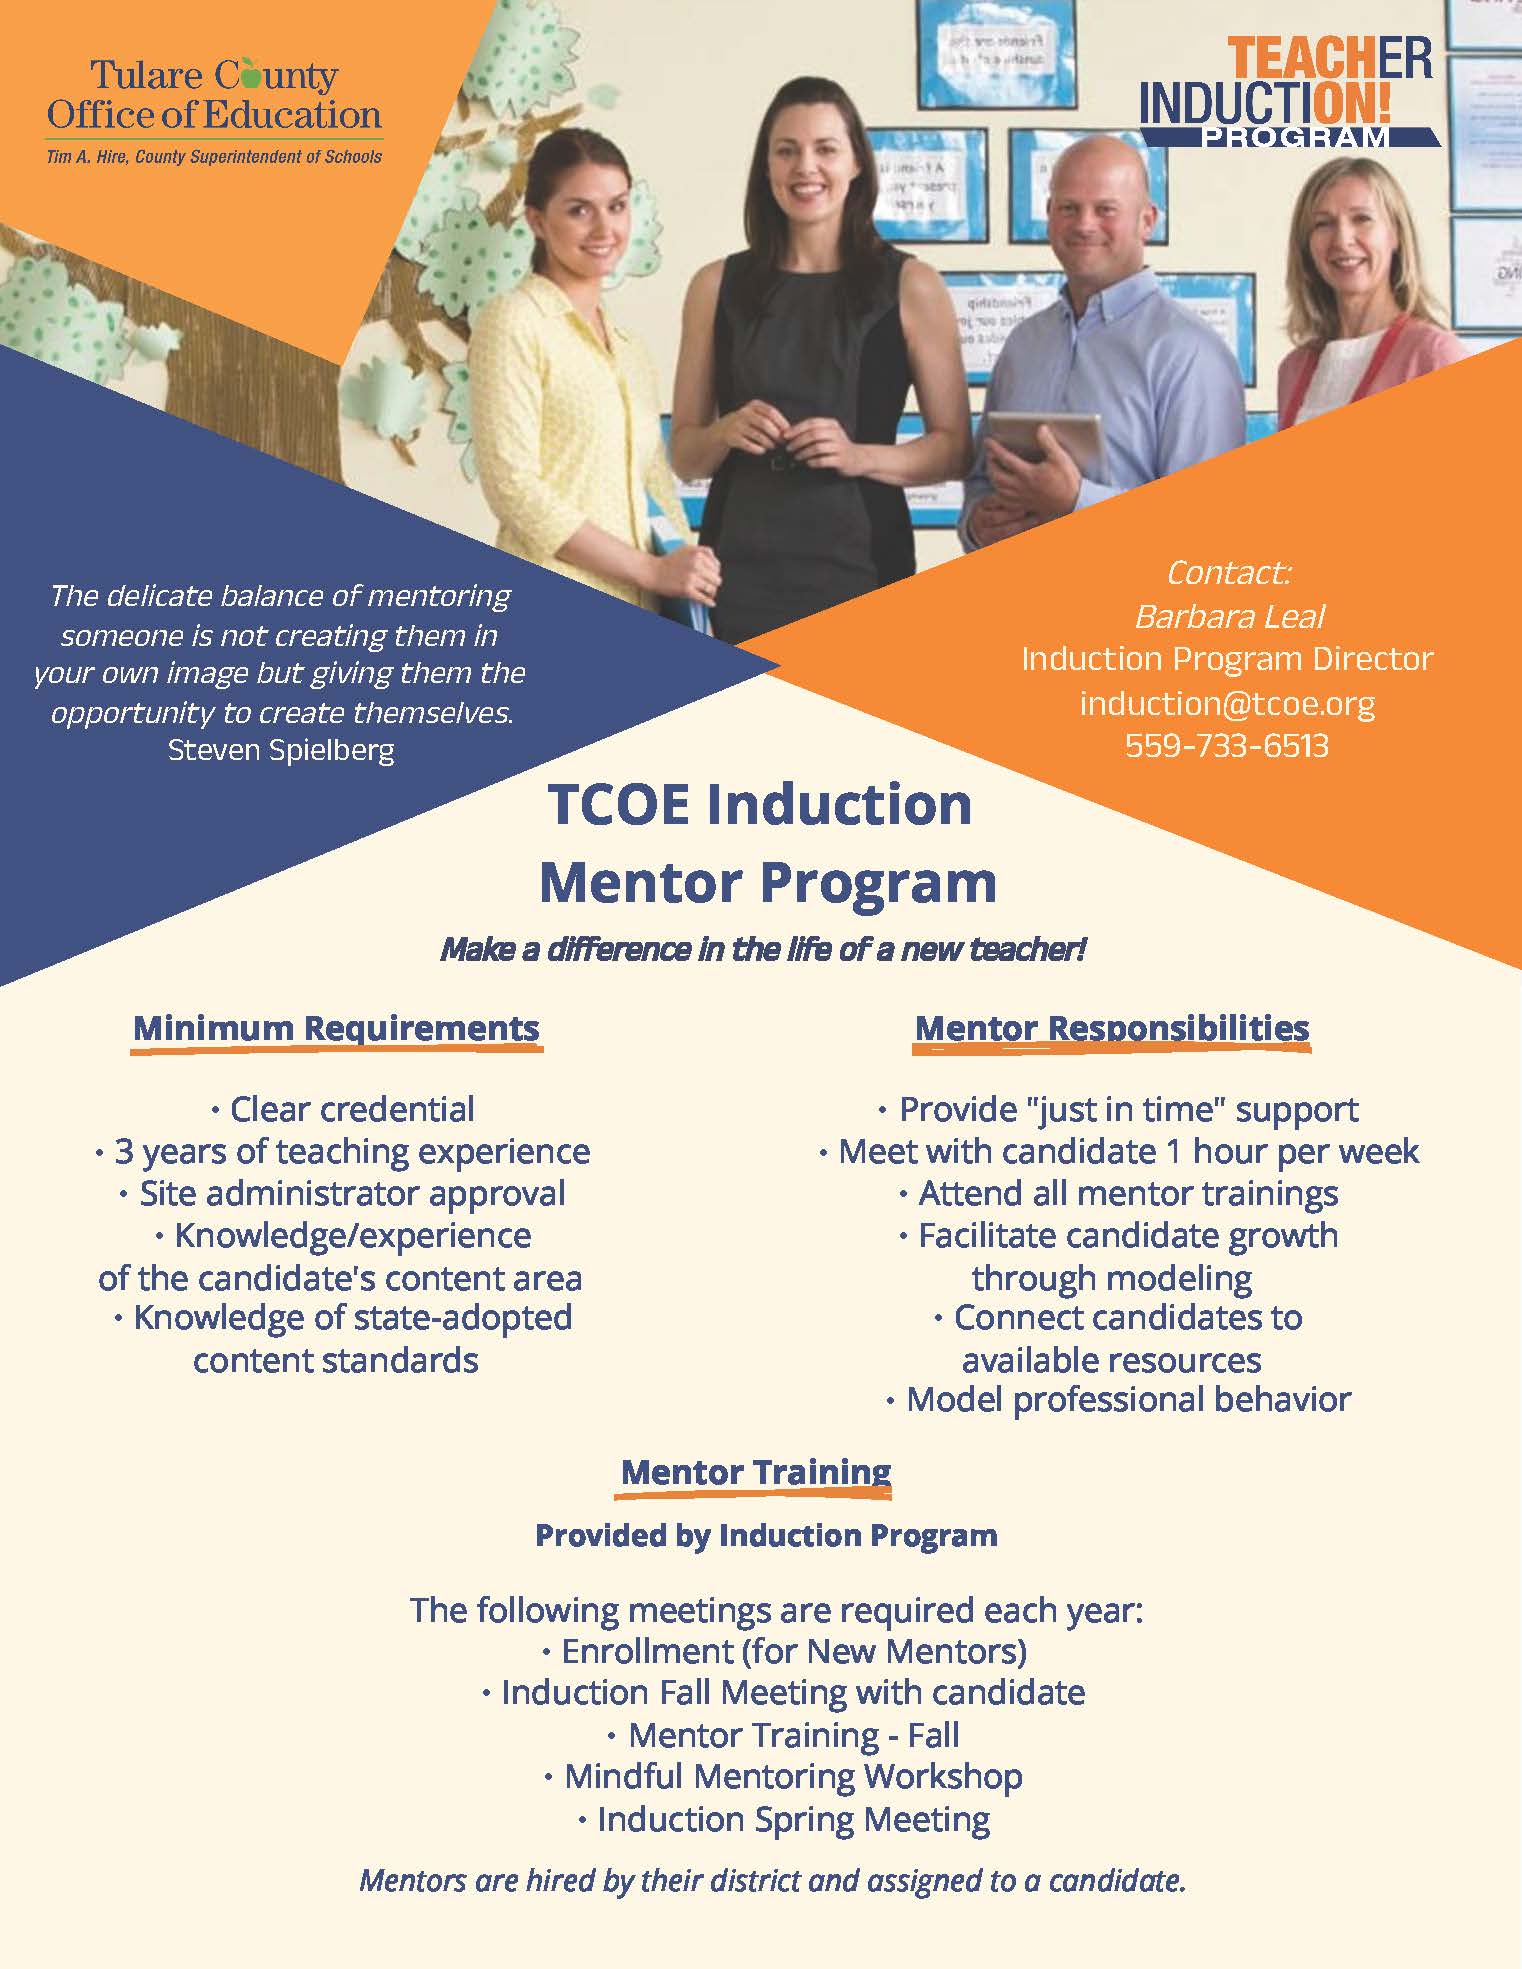 This document explains the requirements for Induction Program Mentors.